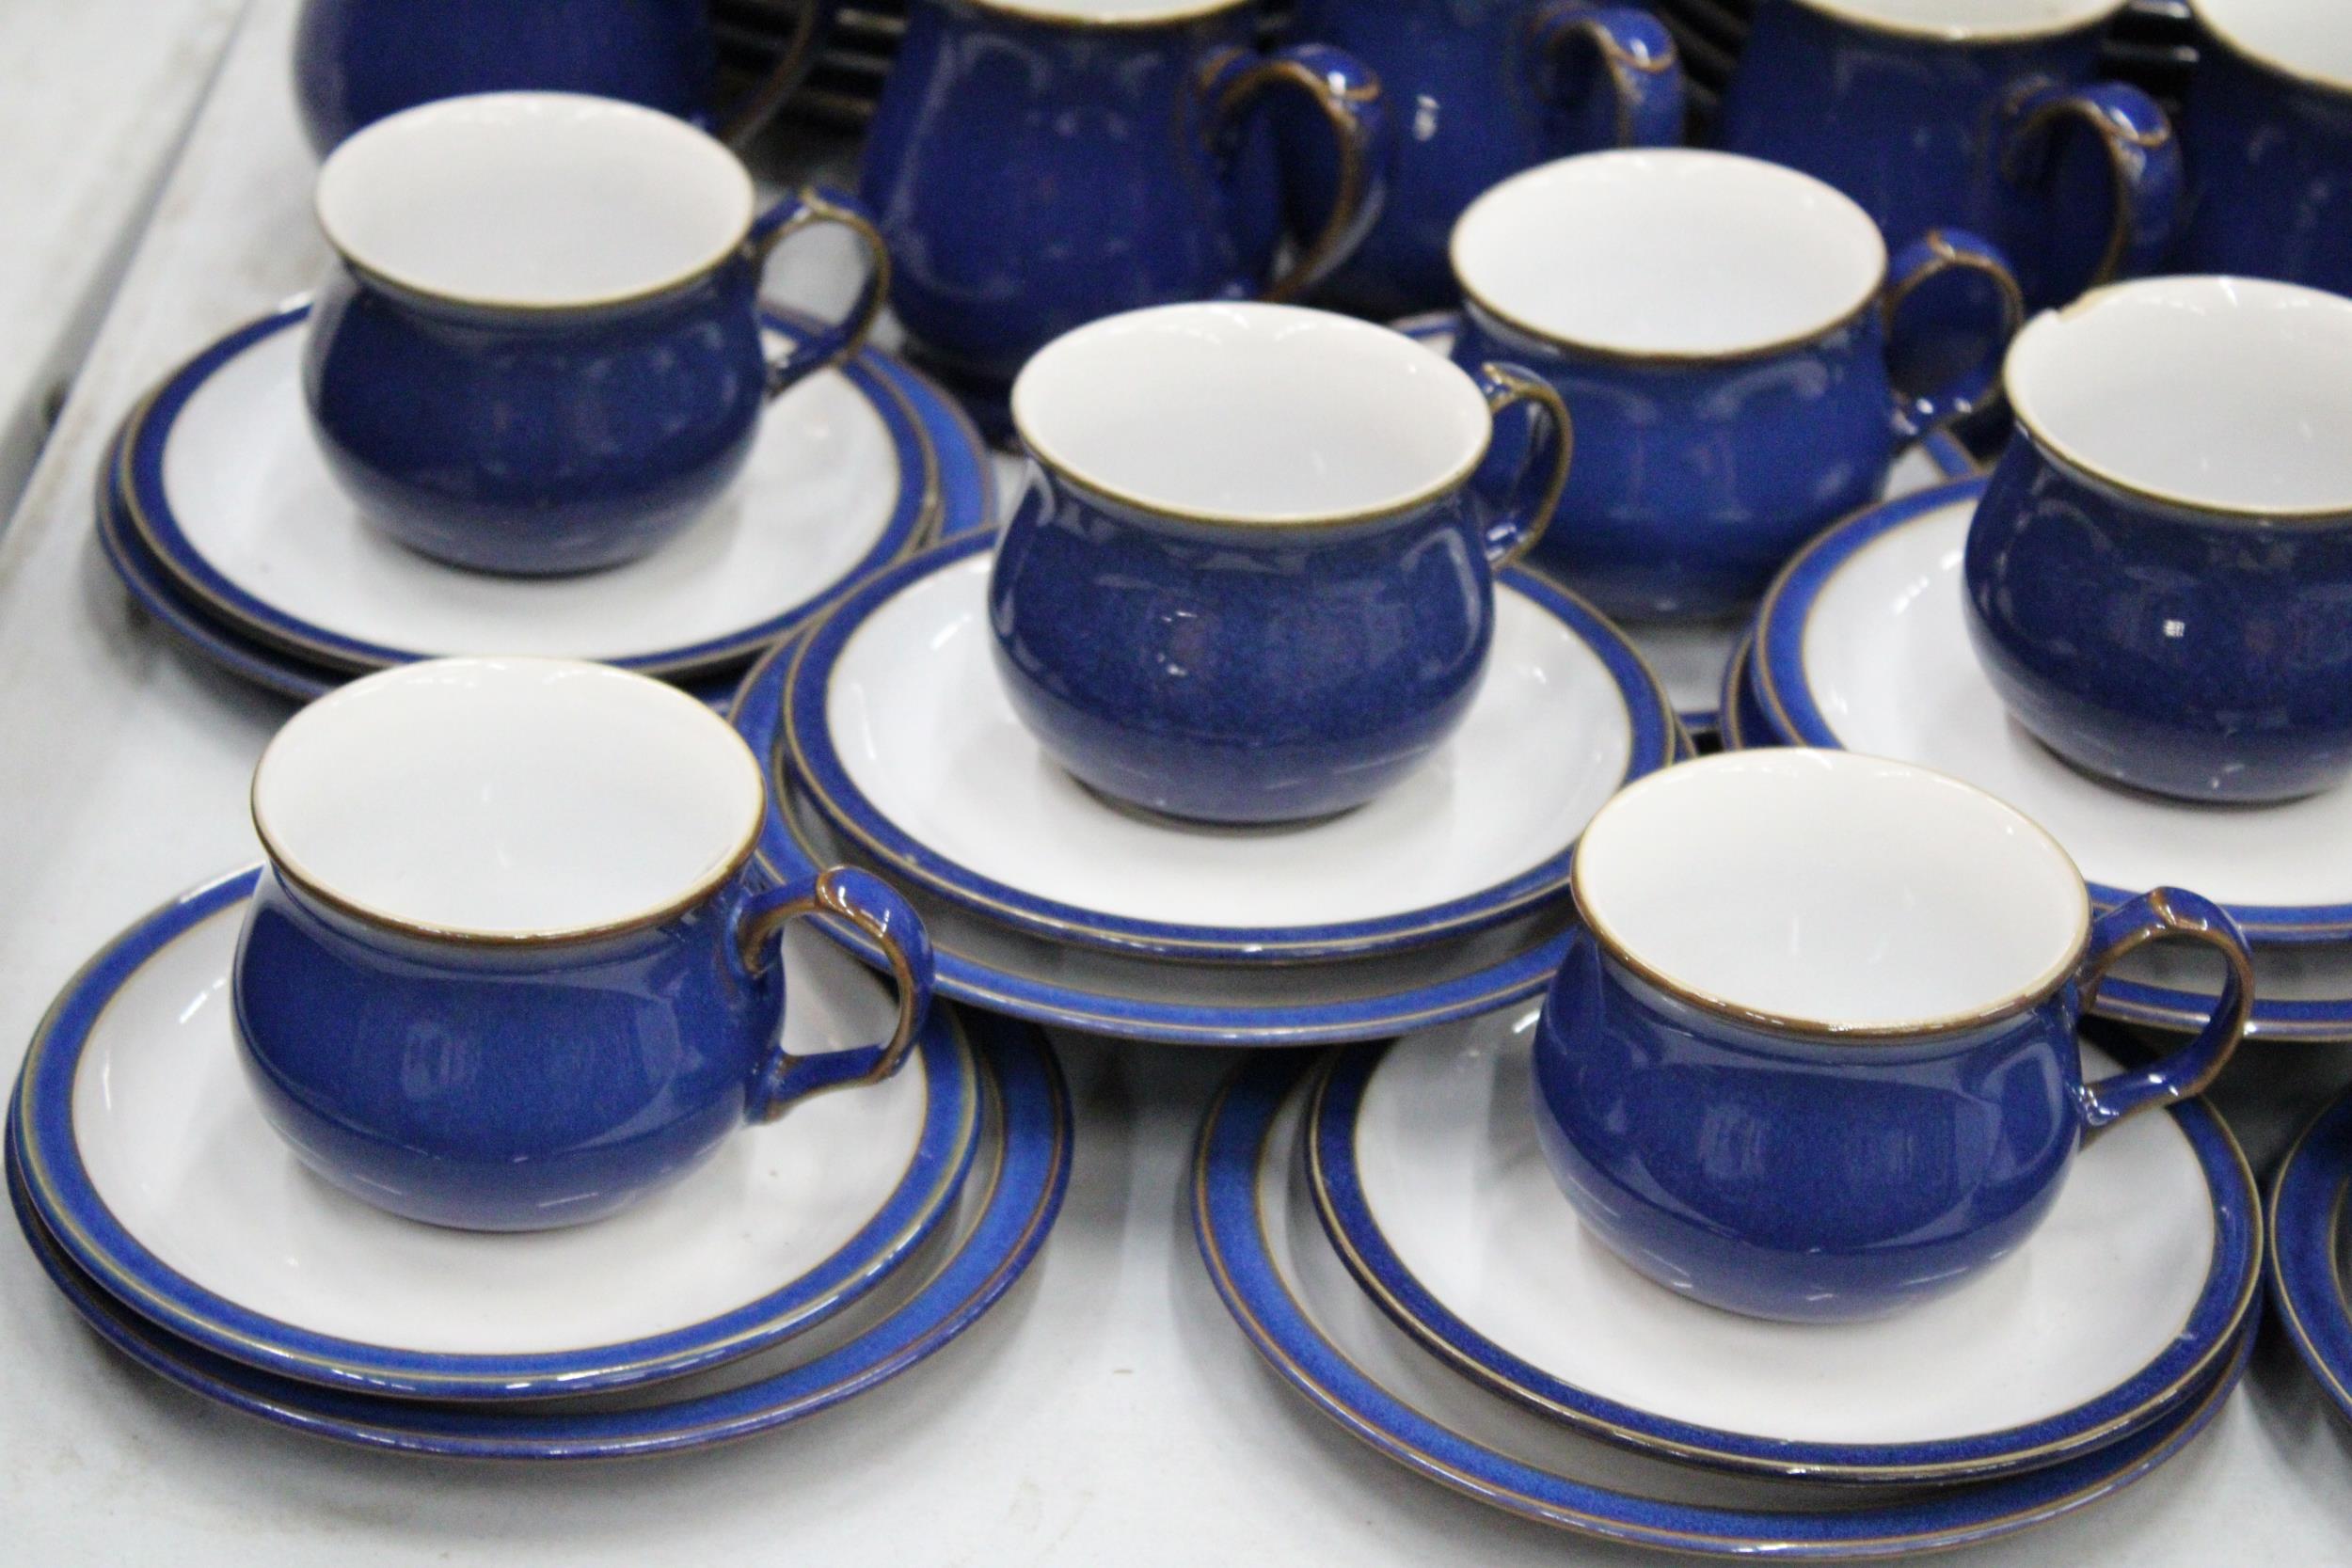 A DENBY COBALT BLUE DINNER SERVICE TO INCLUDE VARIOUS SIZES OF PLATES, BOWLS, A LARGE JUG, SUGAR - Image 2 of 5